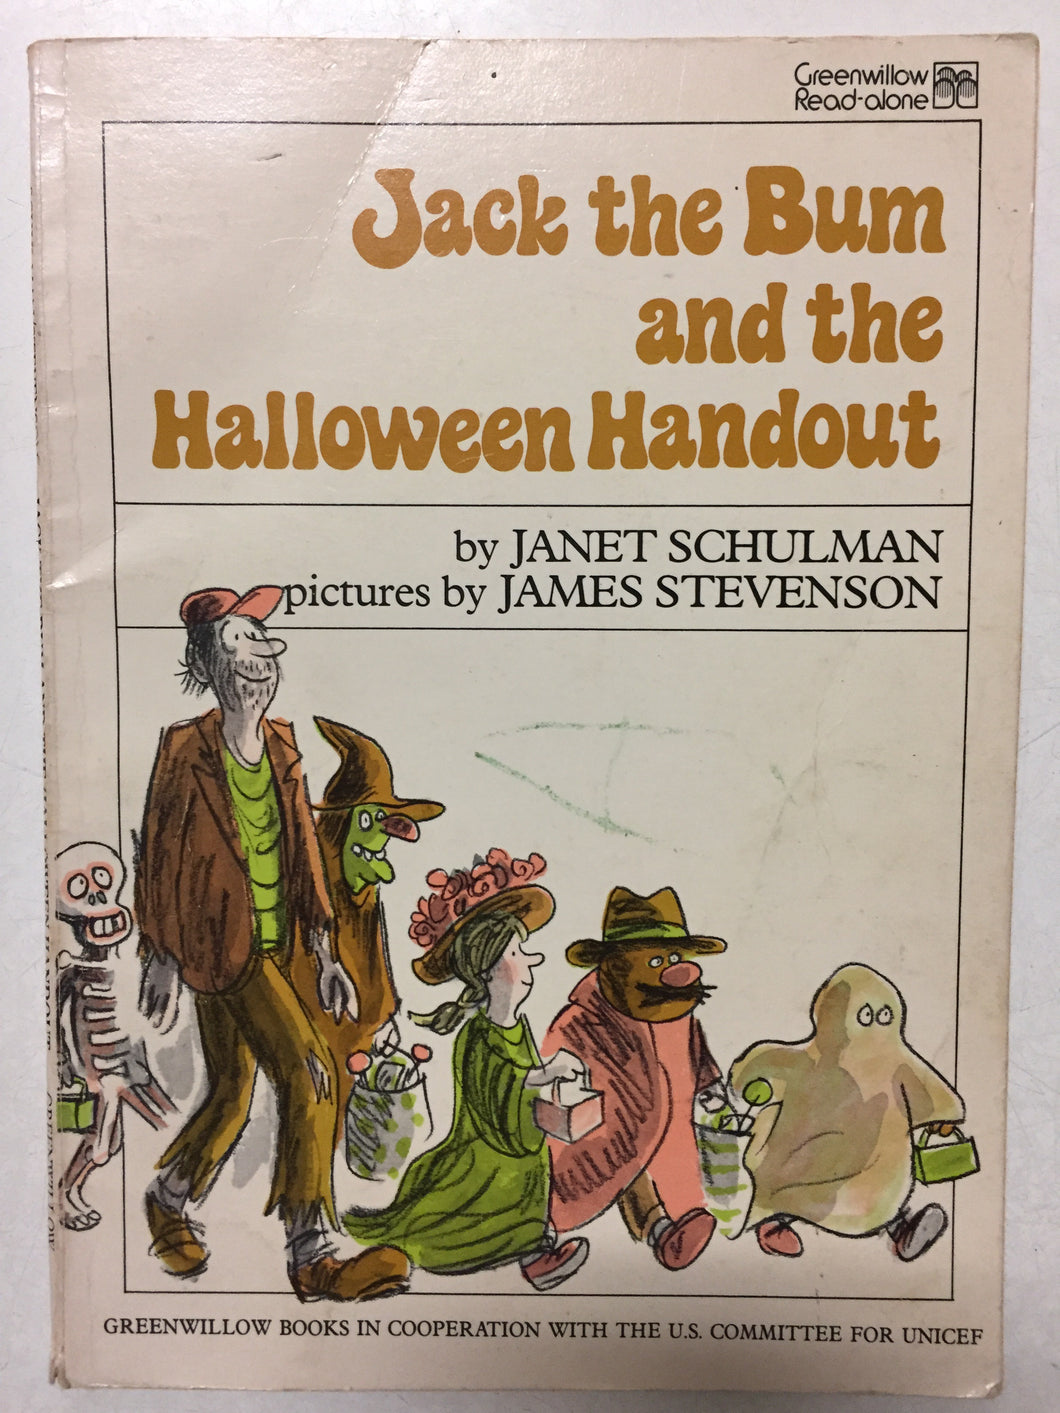 Jack the Bum and the Halloween Handout